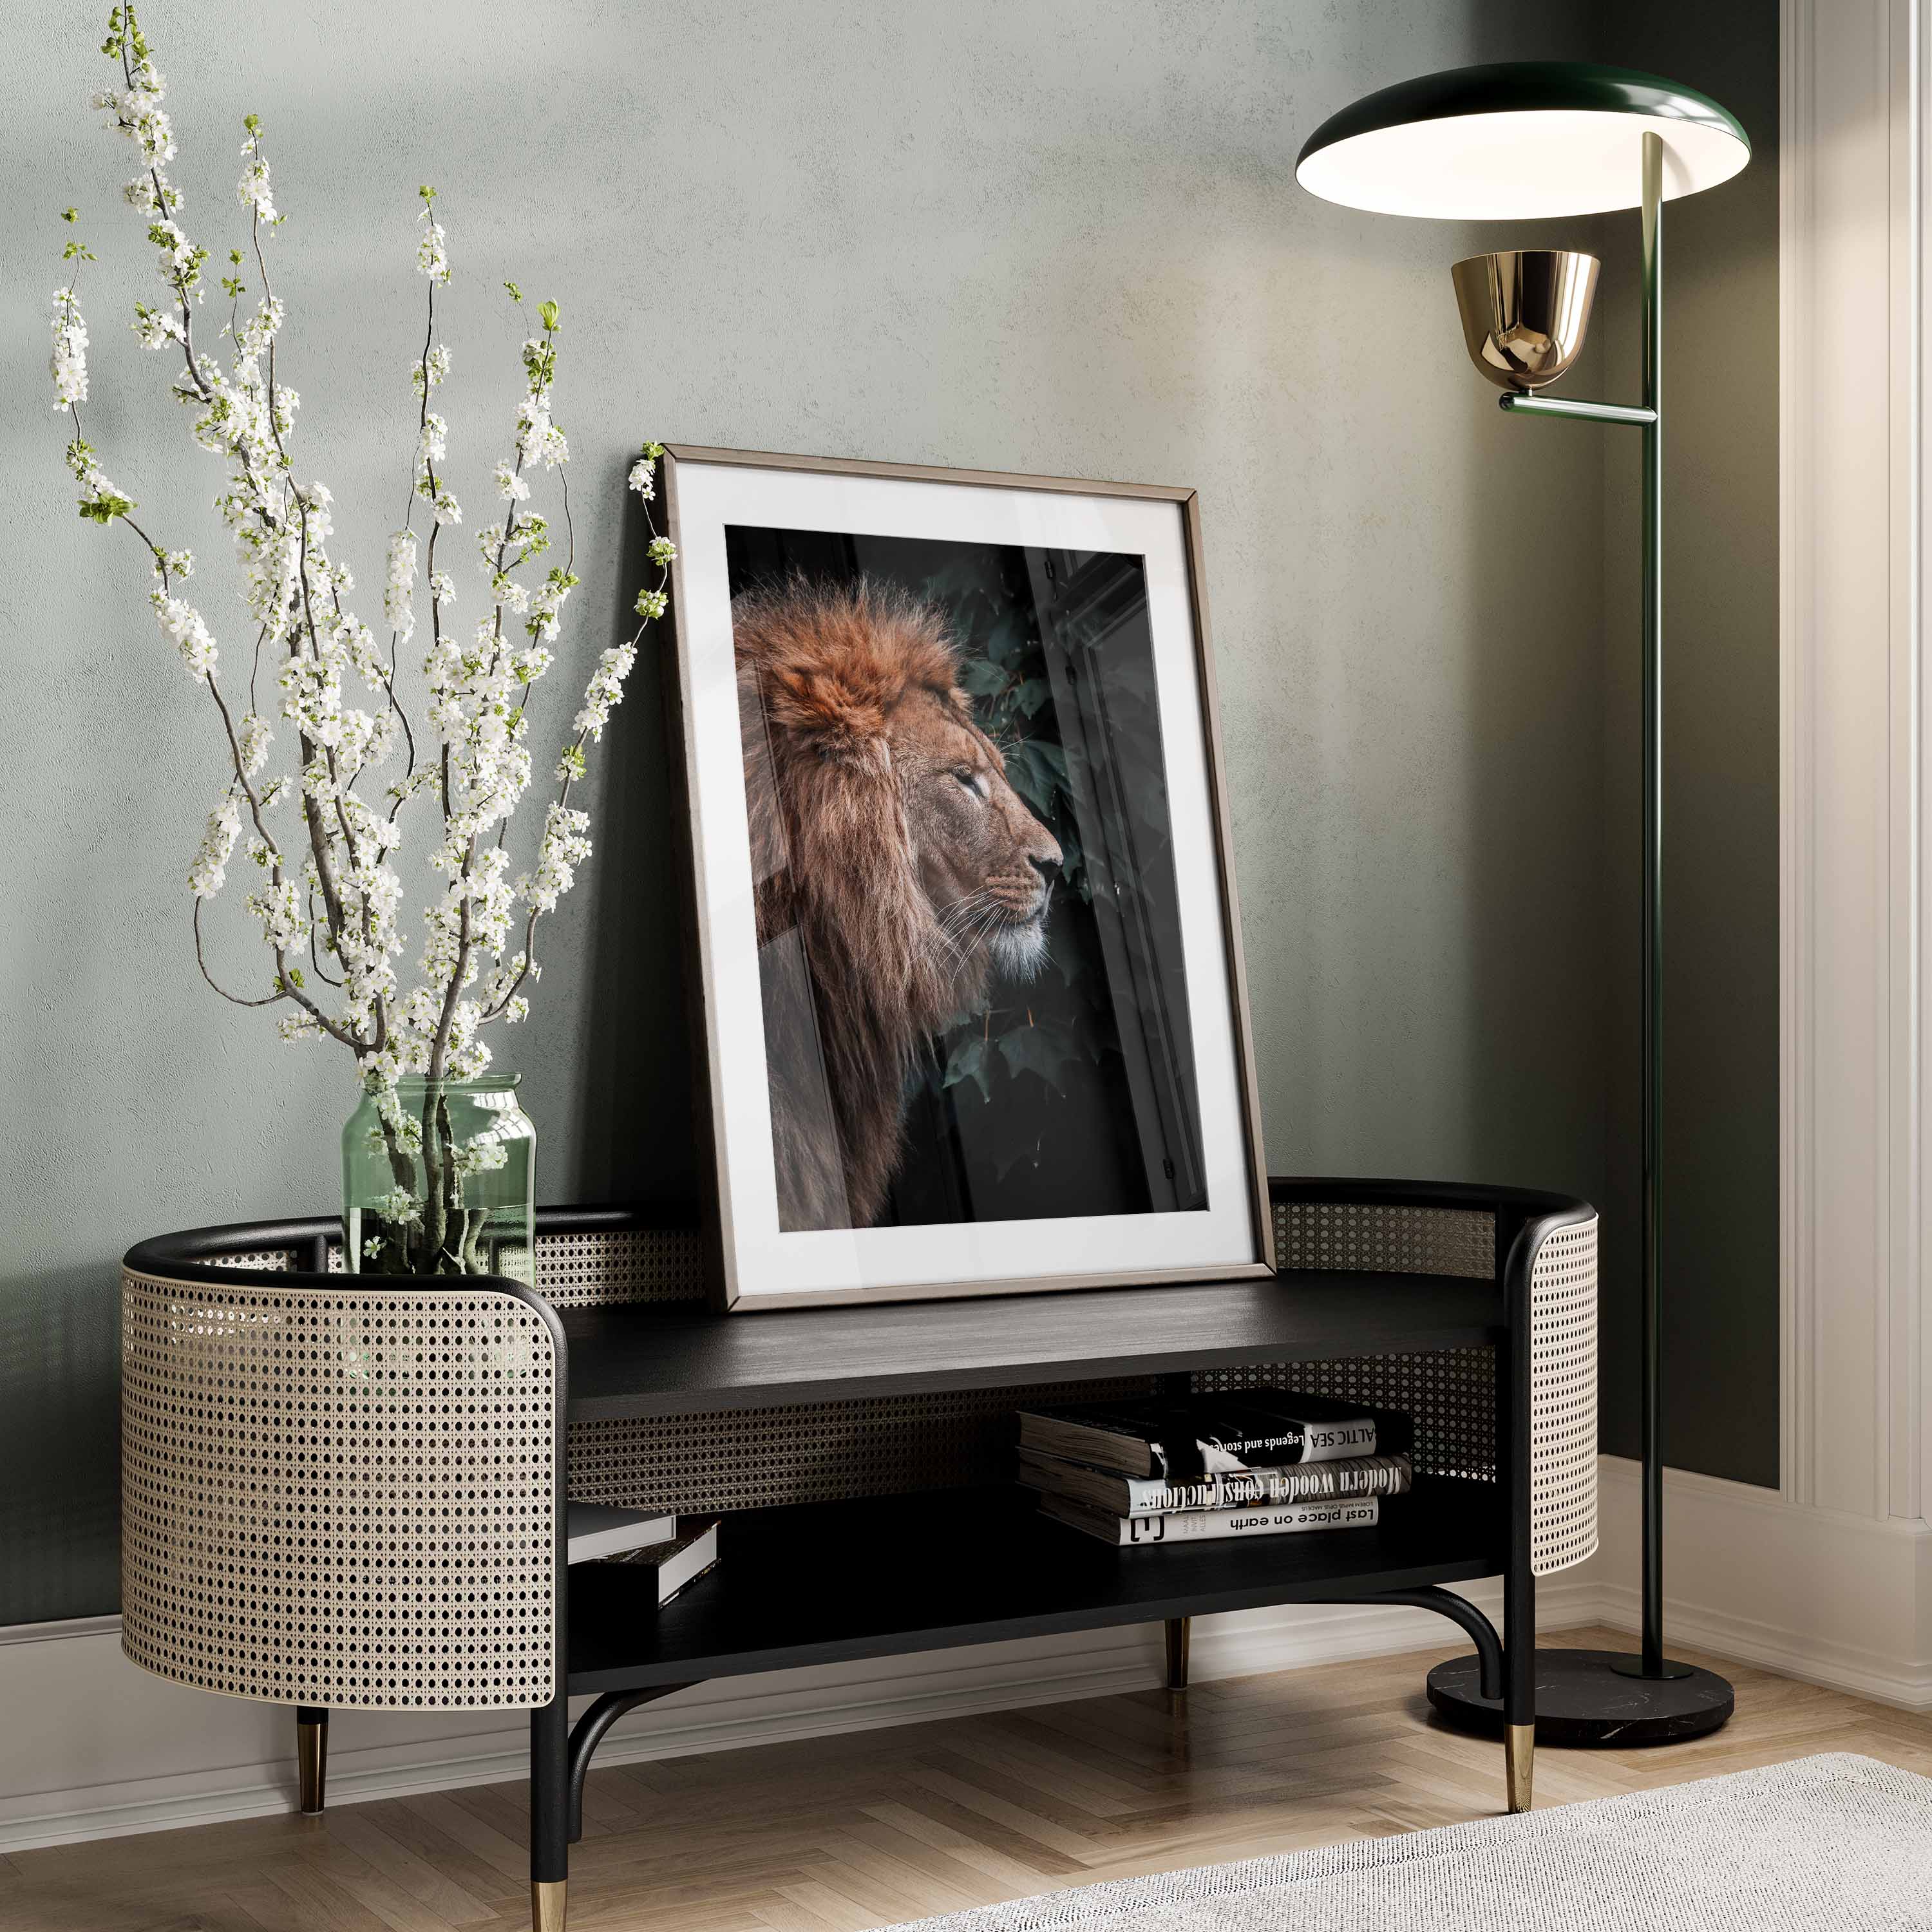 Photography Poster of a lion from the side.